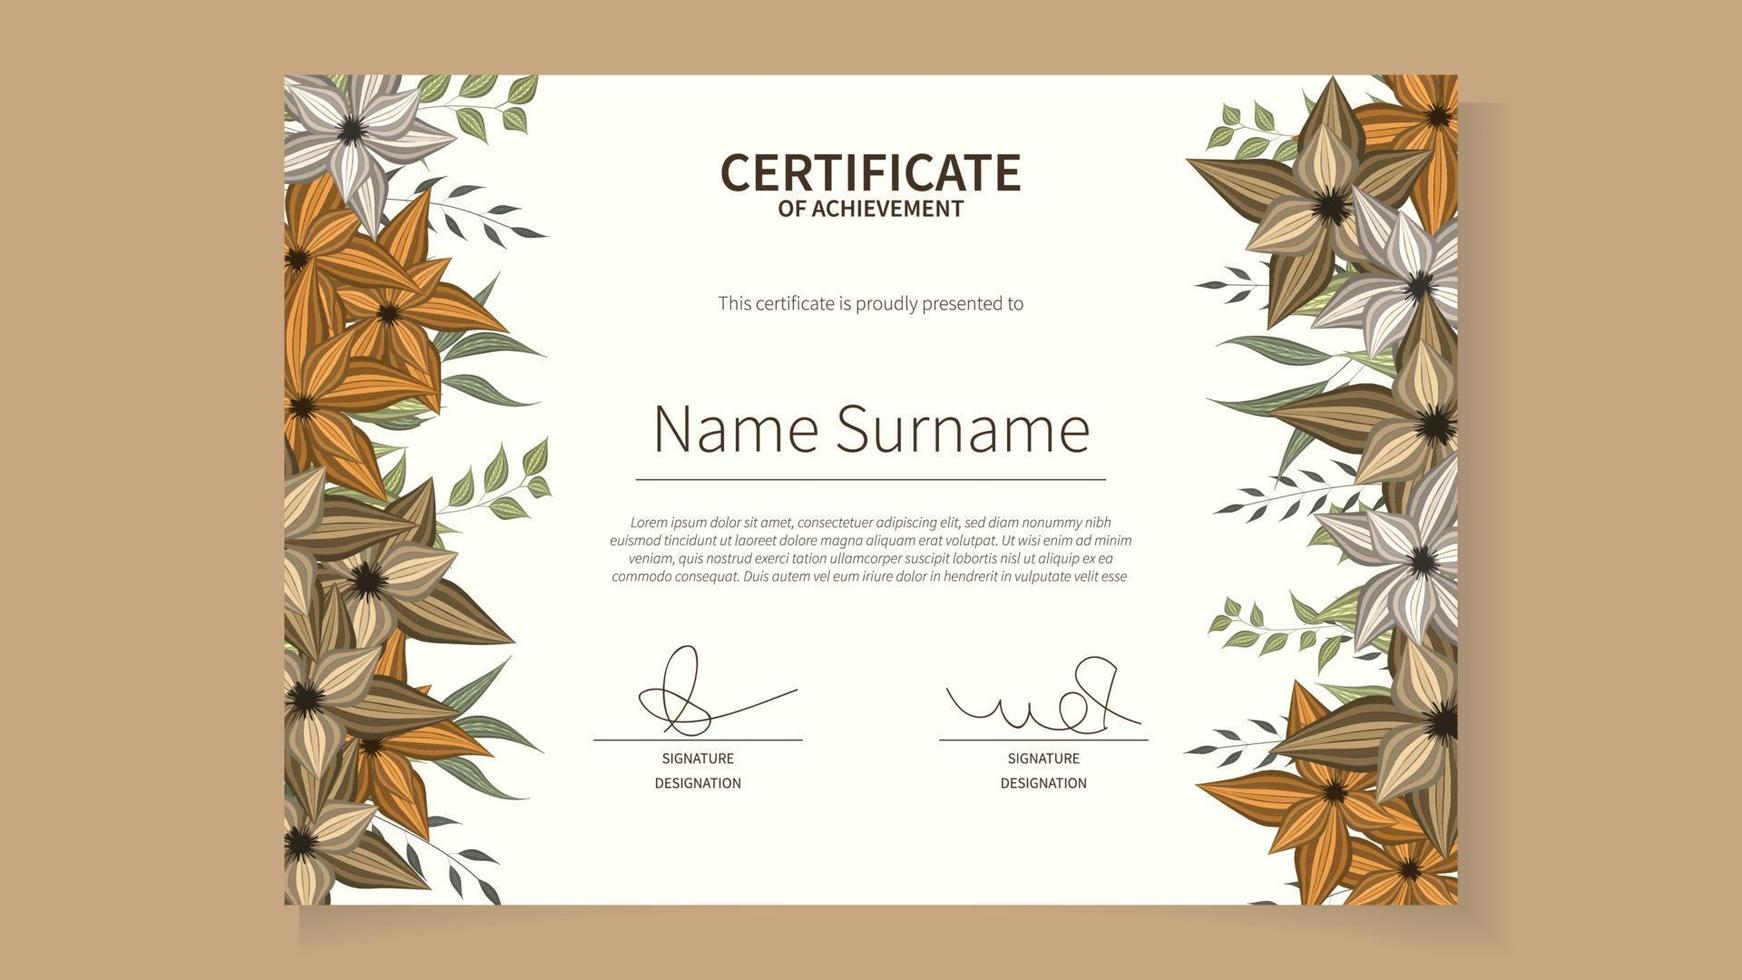 Printable Floral flowers Certificate Background Ornate Frame template vector